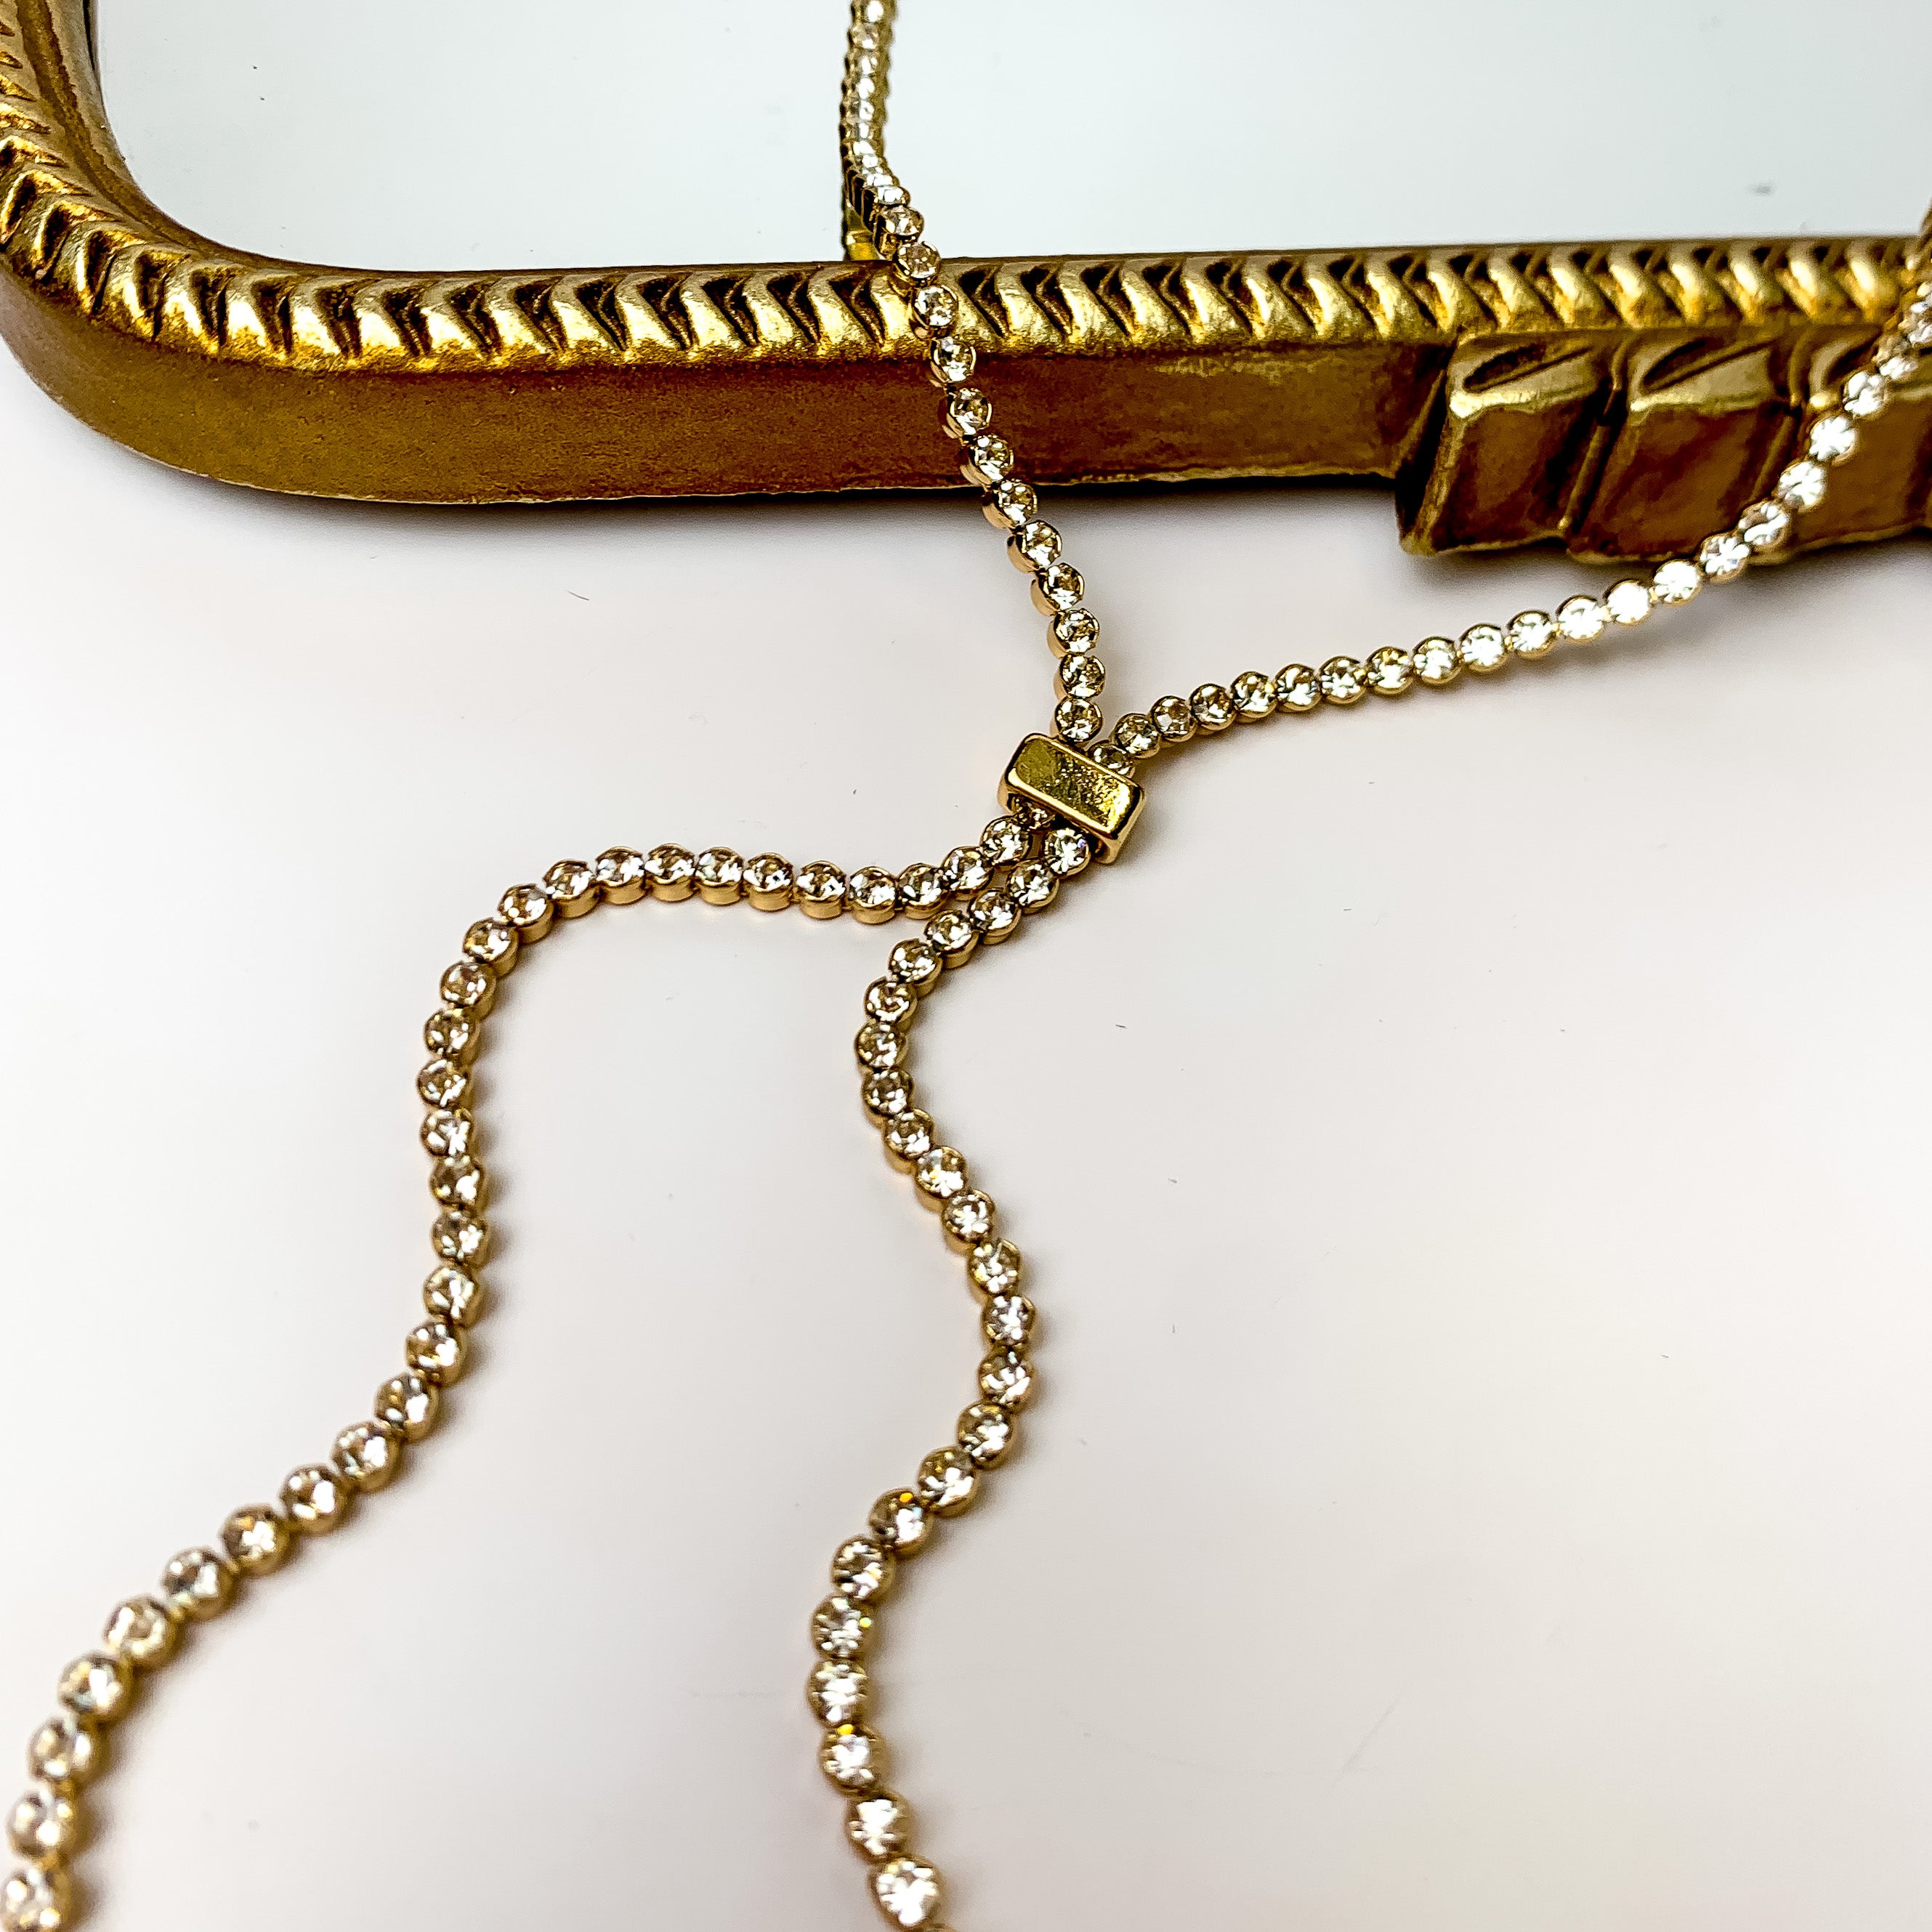 Glamorous Gold Tone Y Necklace With Clear Crystals - Giddy Up Glamour Boutique